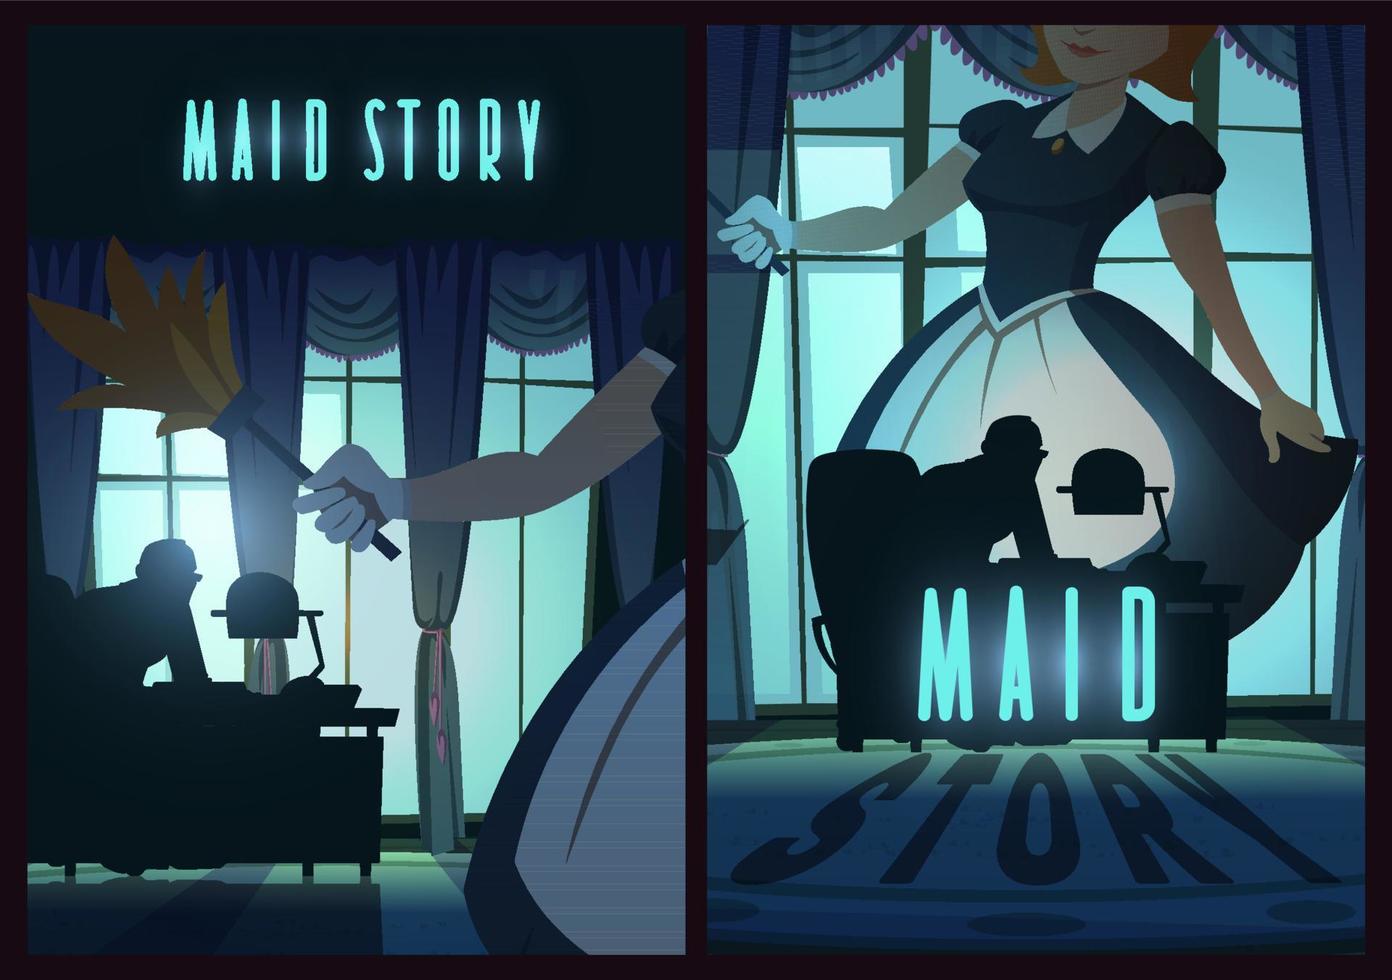 Maid story poster with woman in apron in dark room vector